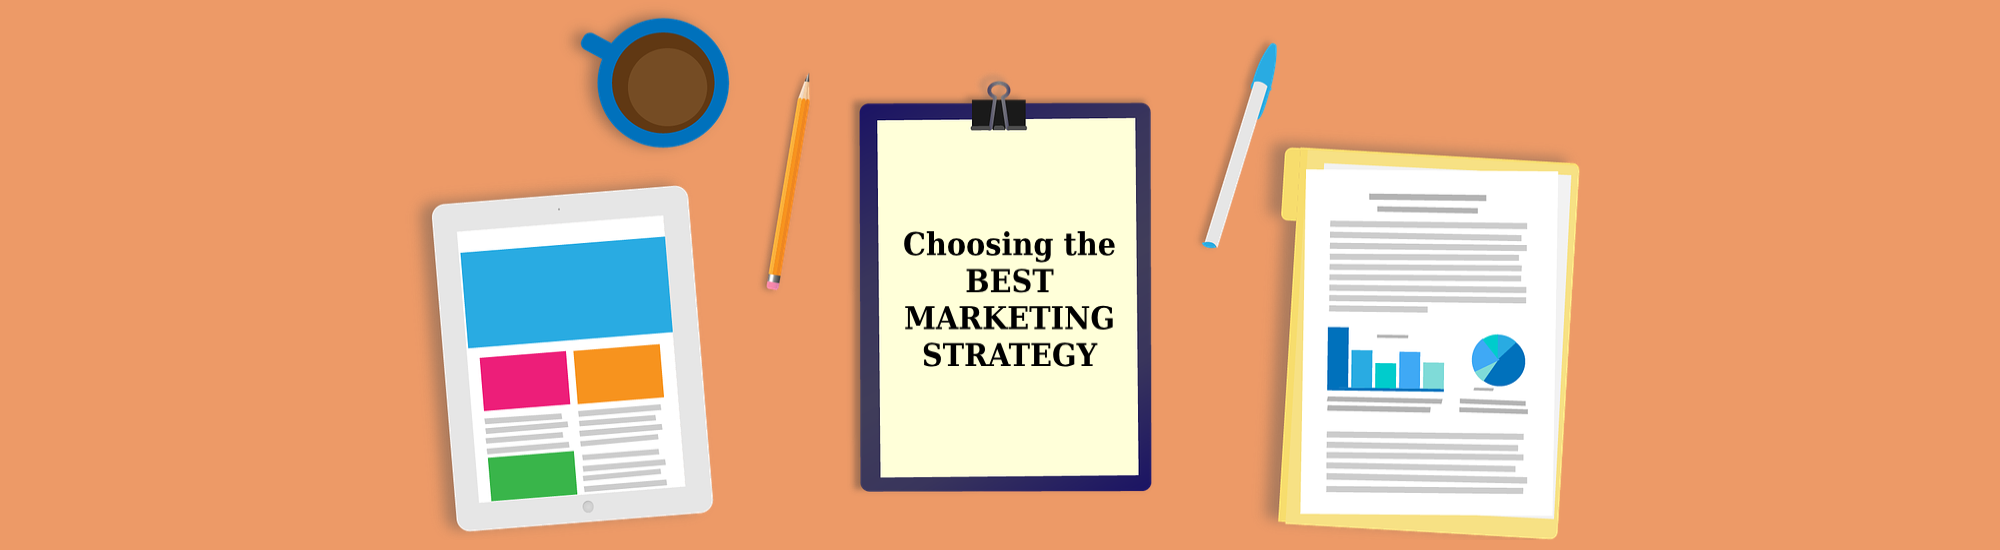 Take The Headache Out Of Choosing The BEST DIGITAL MARKETING STRATEGY